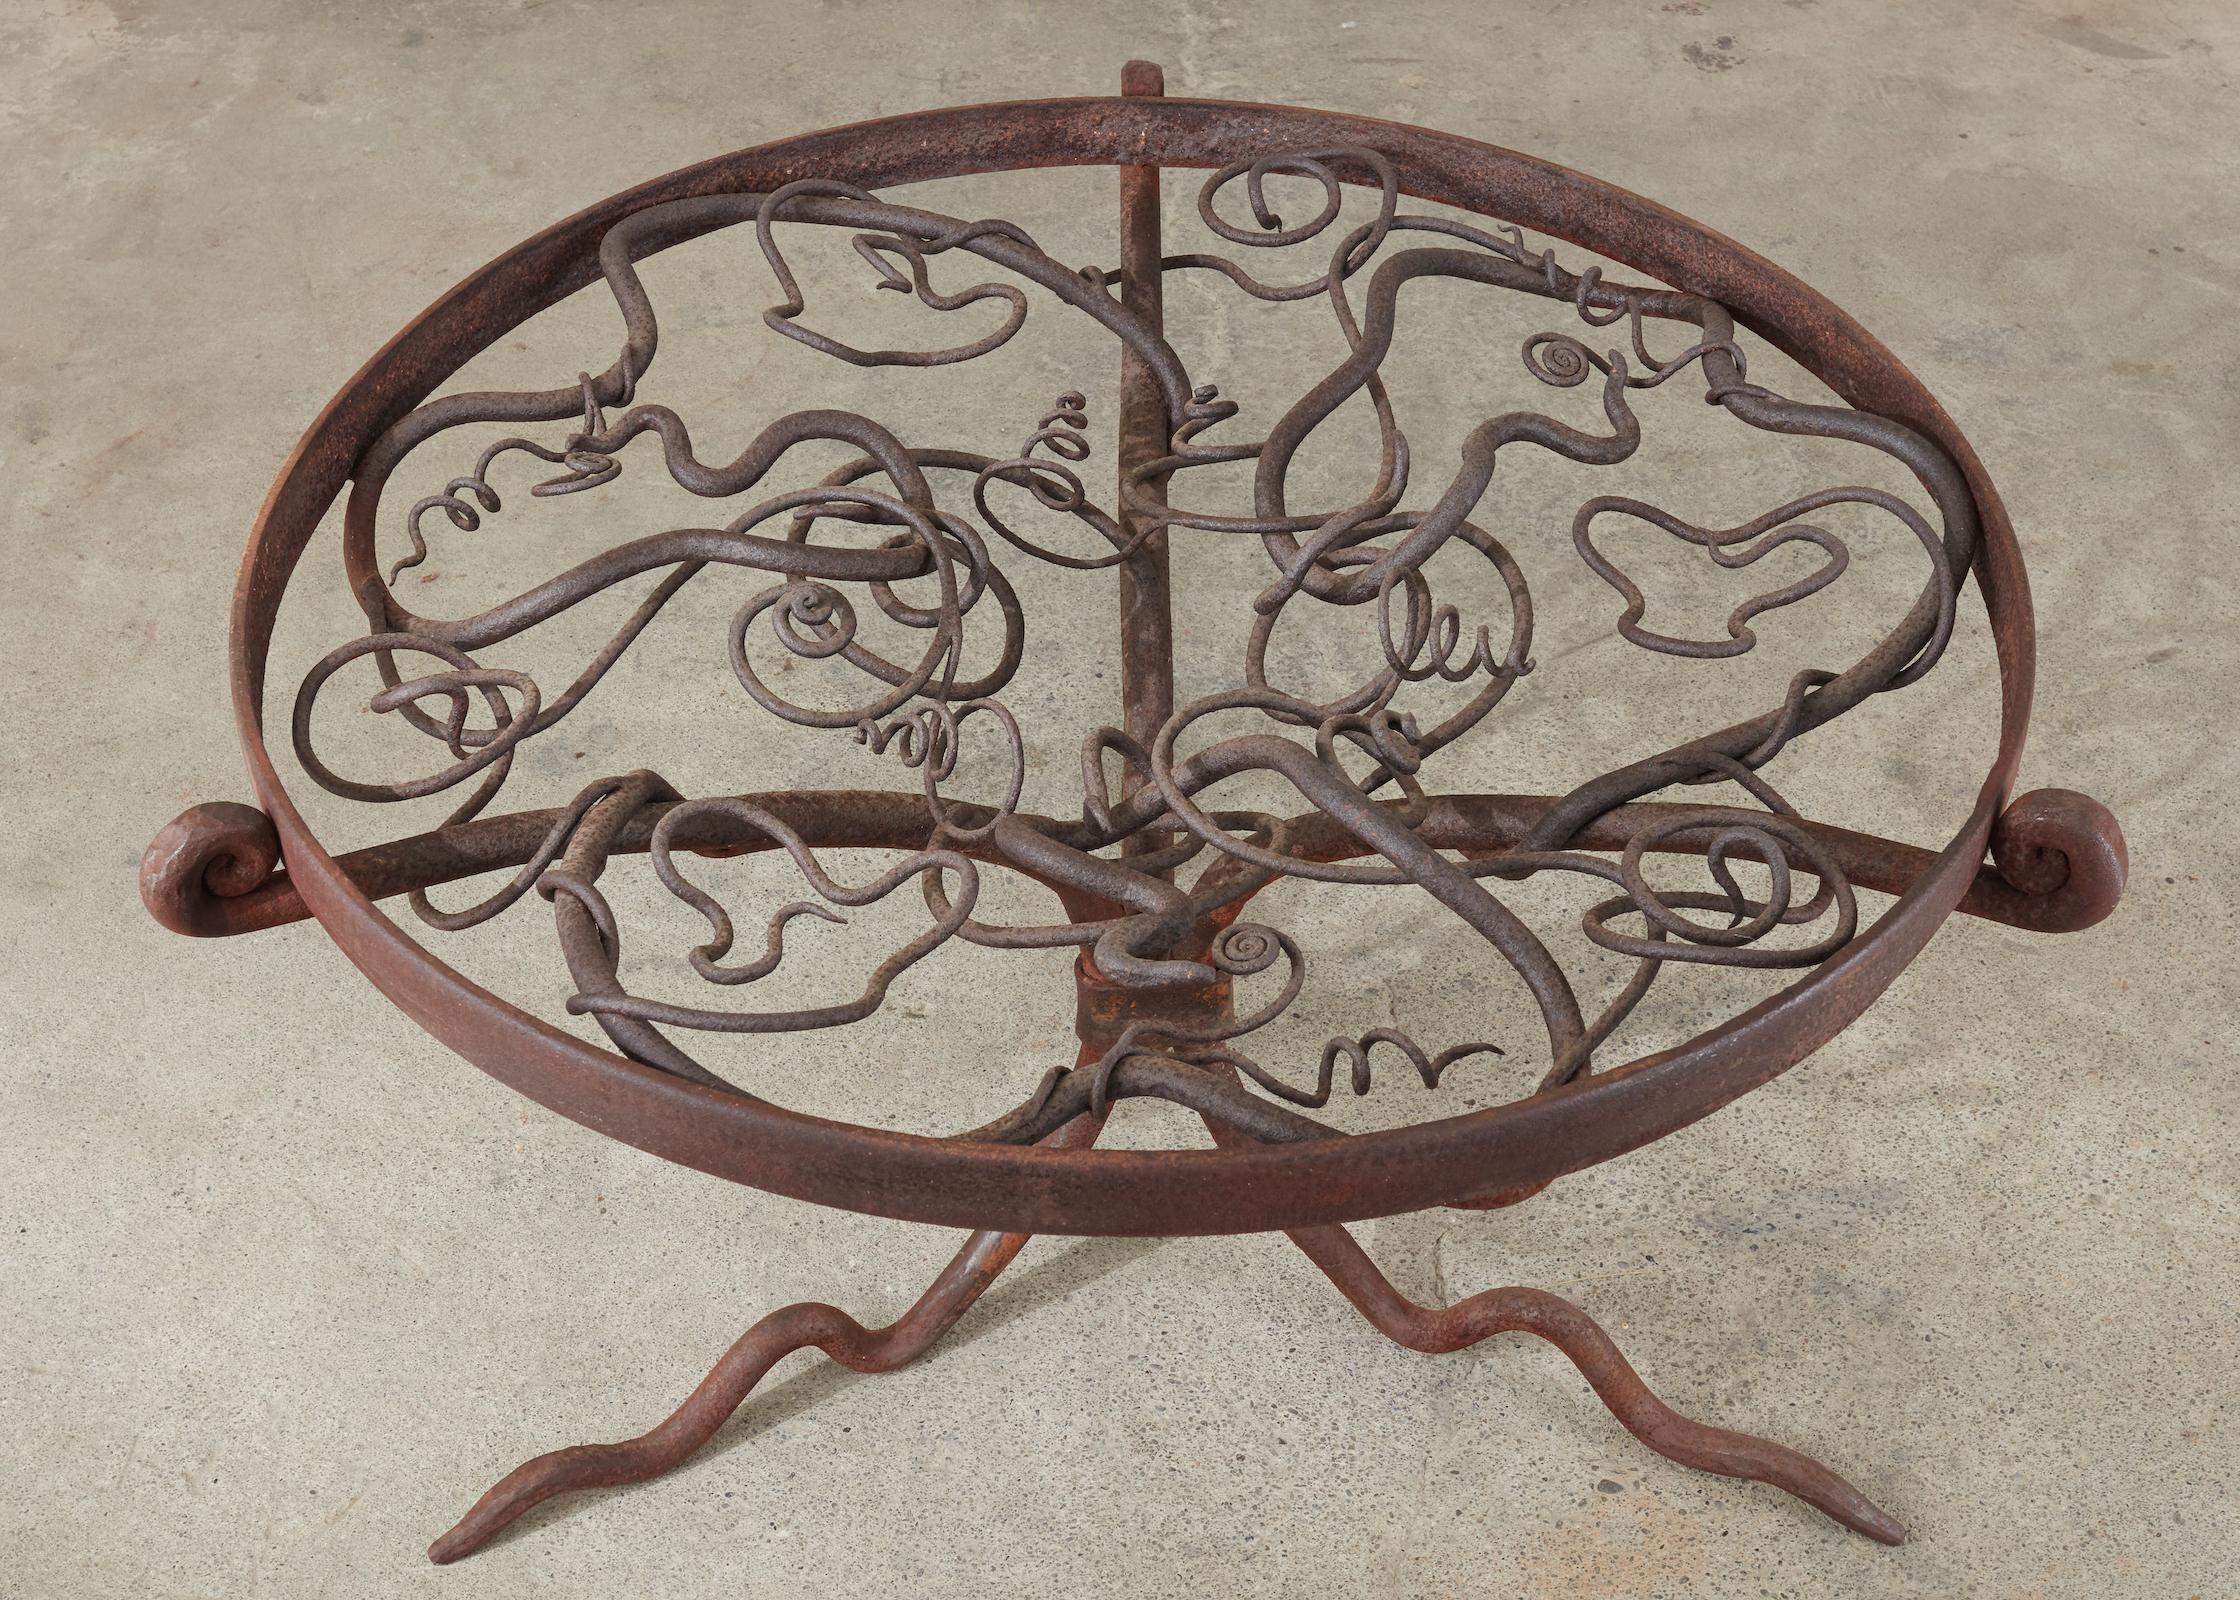 Mid-Century Modern iron center table or garden patio table made on a monumental scale. The Brutalist style sculpture is supported by three branch style legs ending with scrolled fronds on top. The legs are conjoined in the middle and on the top with